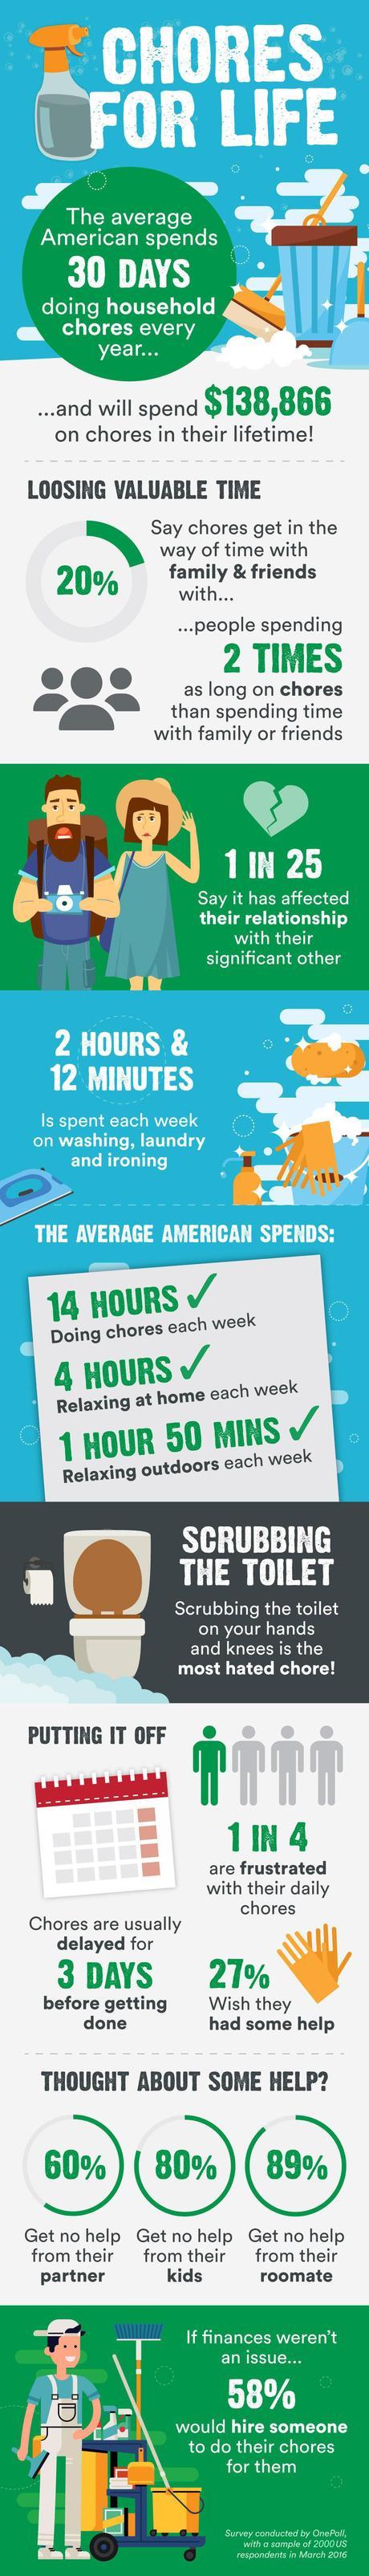 AMERICANS WILL SPEND $138,866 ON CHORES IN THEIR LIFETIME